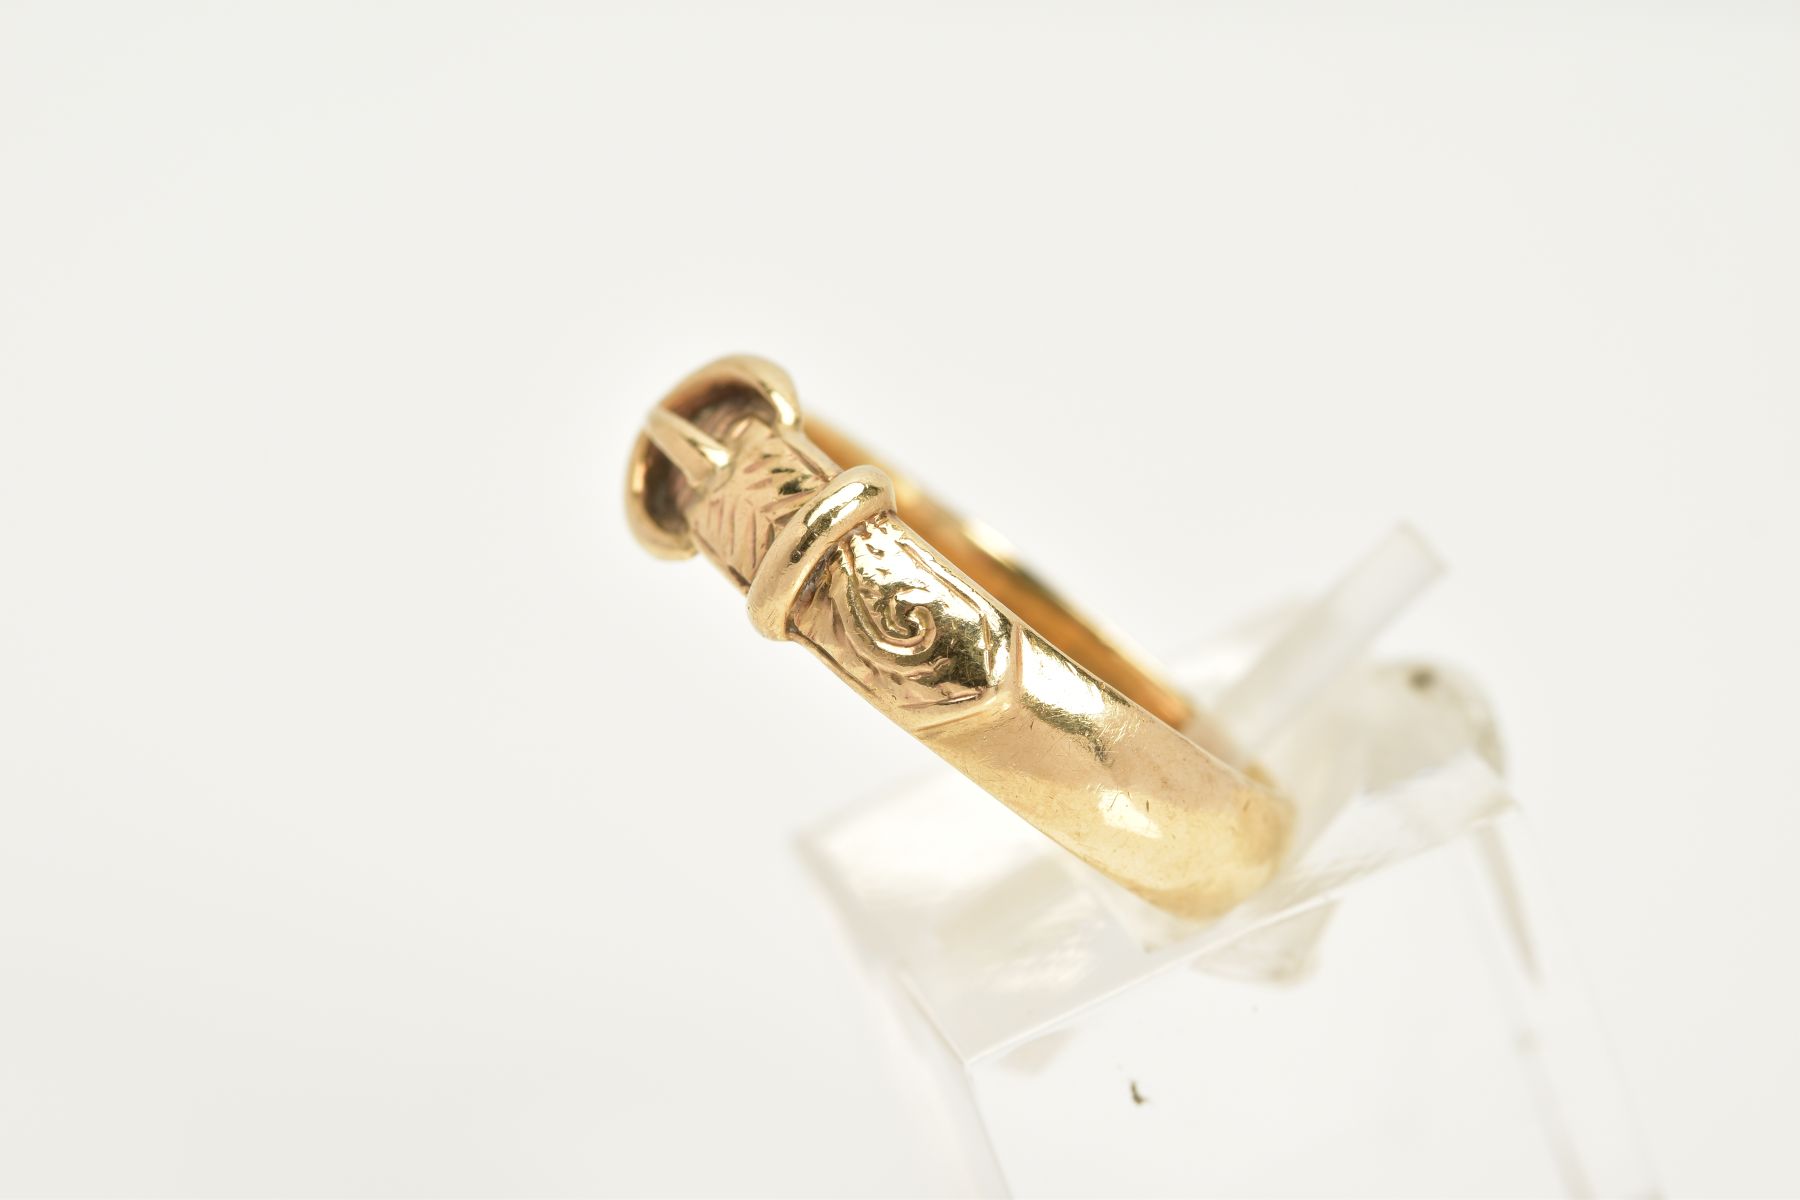 A 9CT GOLD BELT BUCKLE RING, with floral engraved detail, hallmarked 9ct gold Birmingham, ring - Image 2 of 3